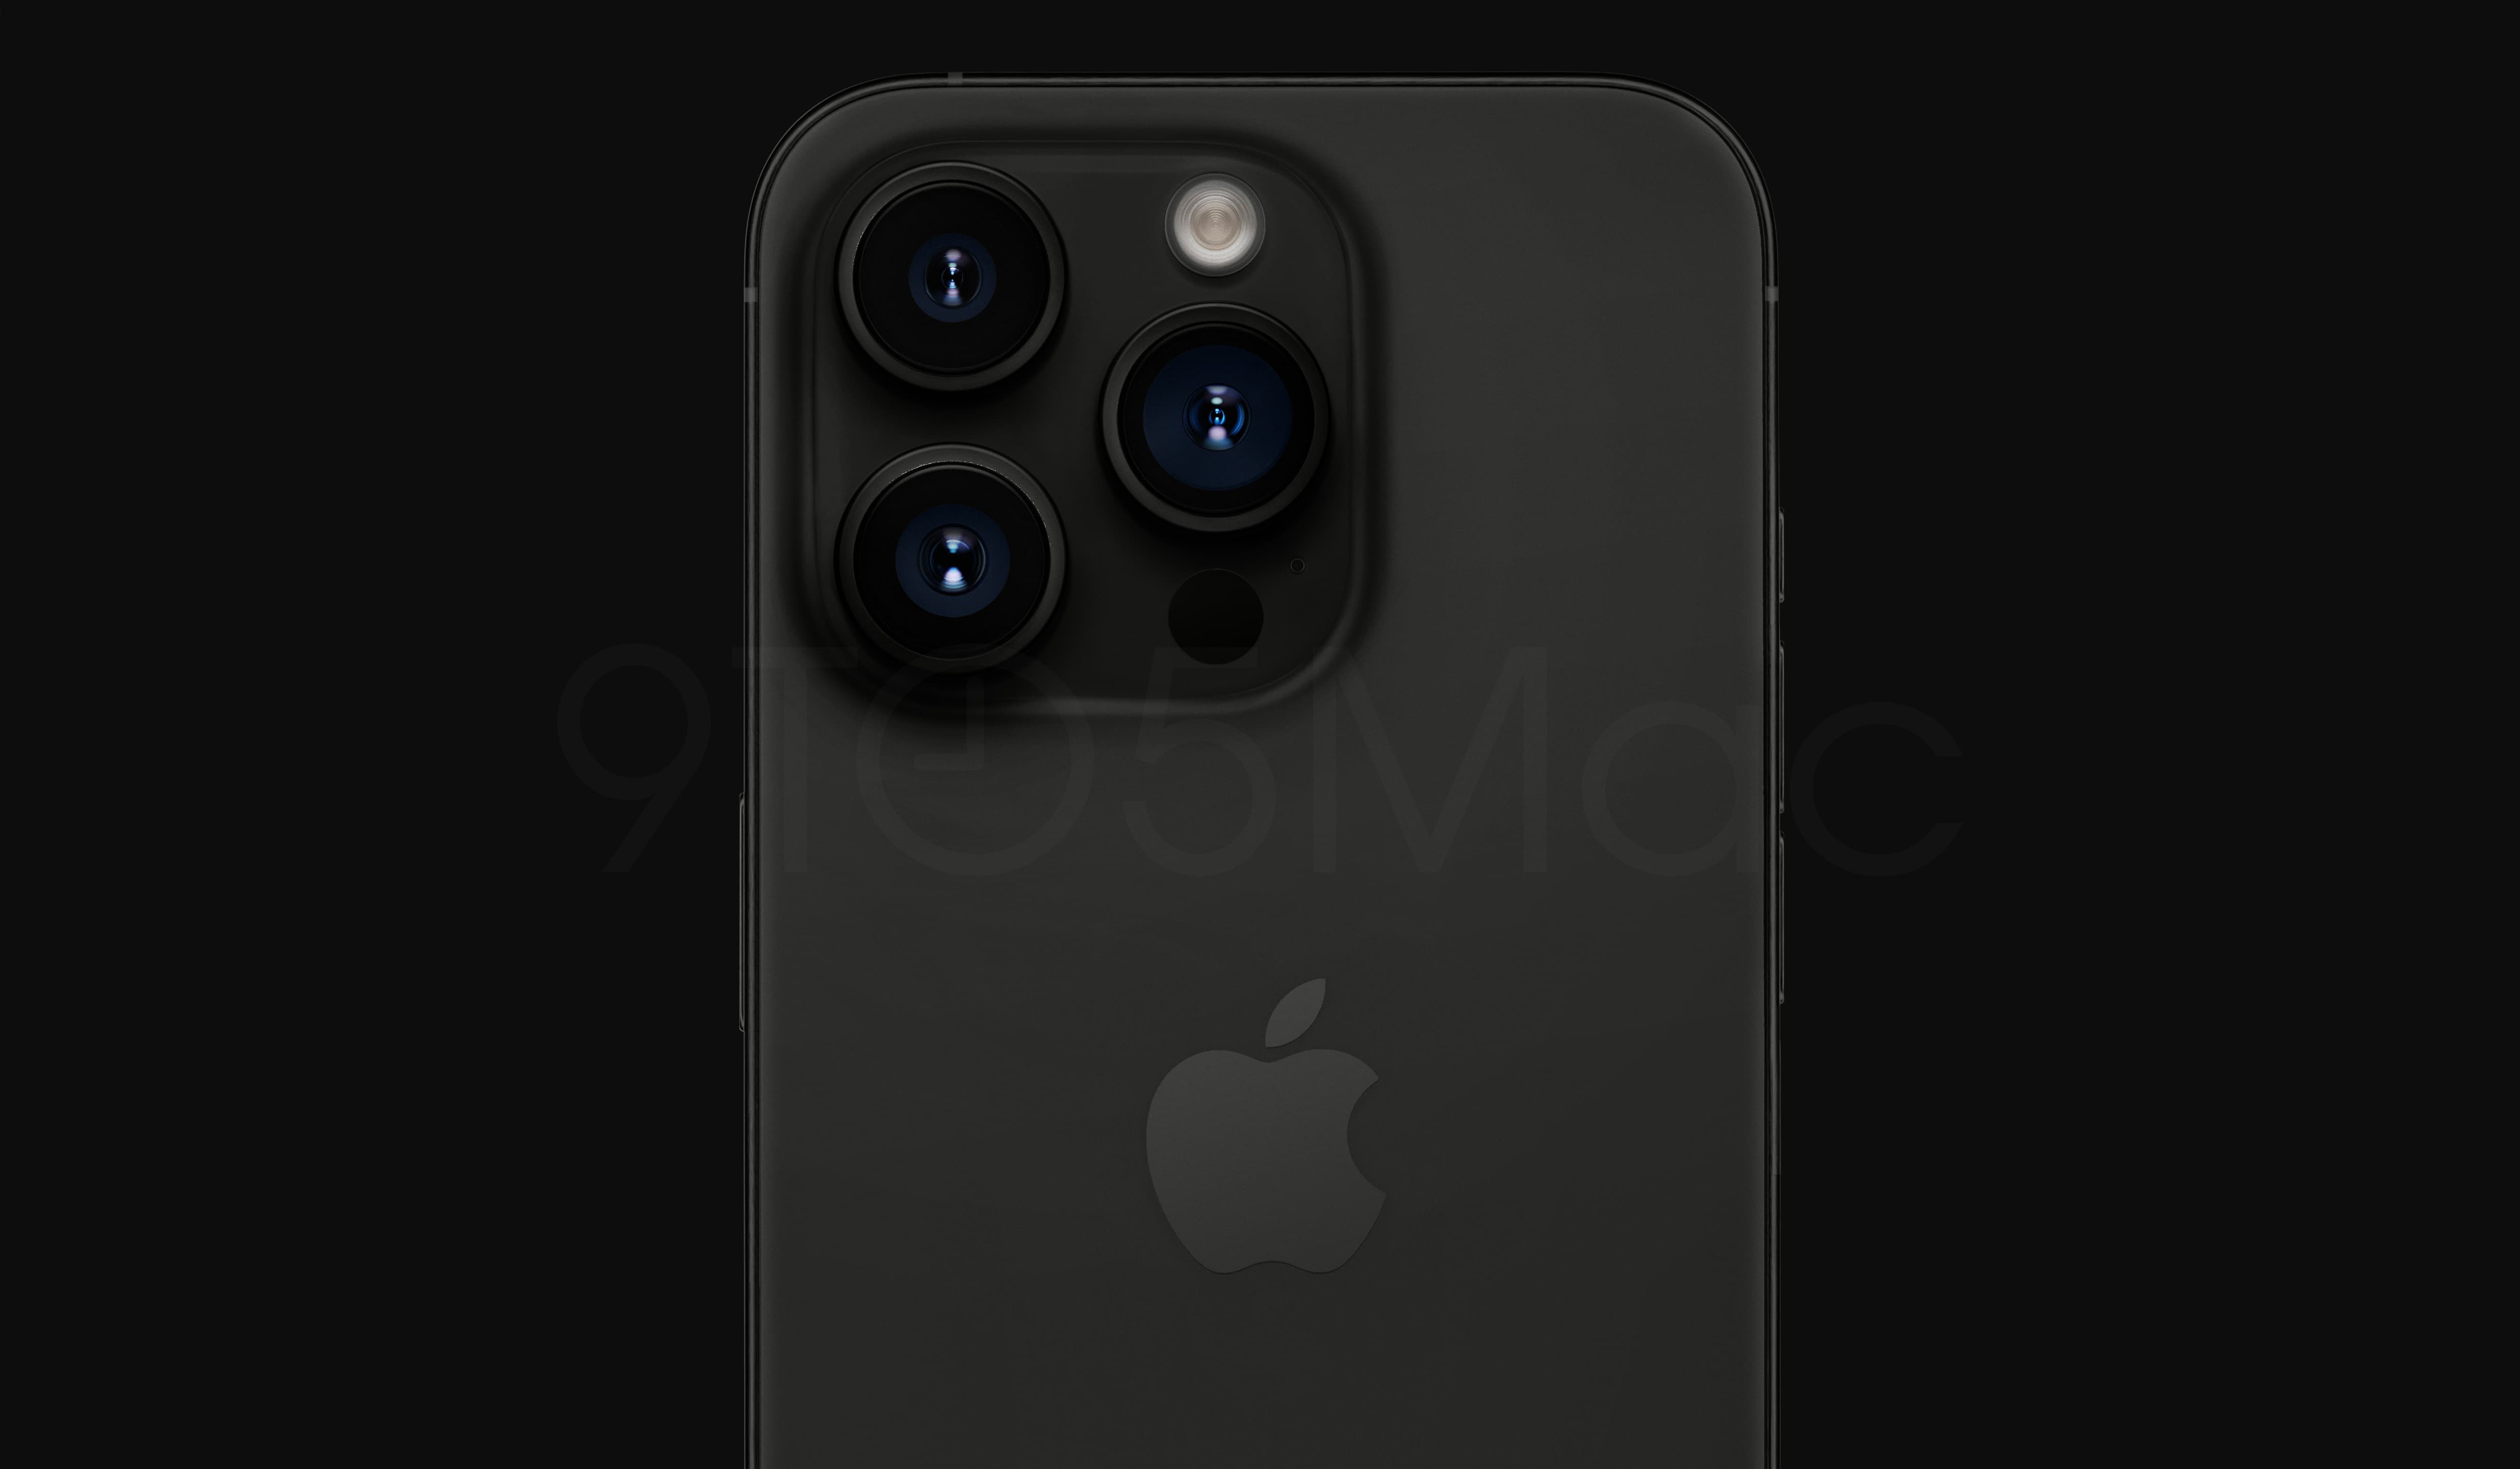 iPhone 15 Pro Models Again Rumored to See $100 Price Increase